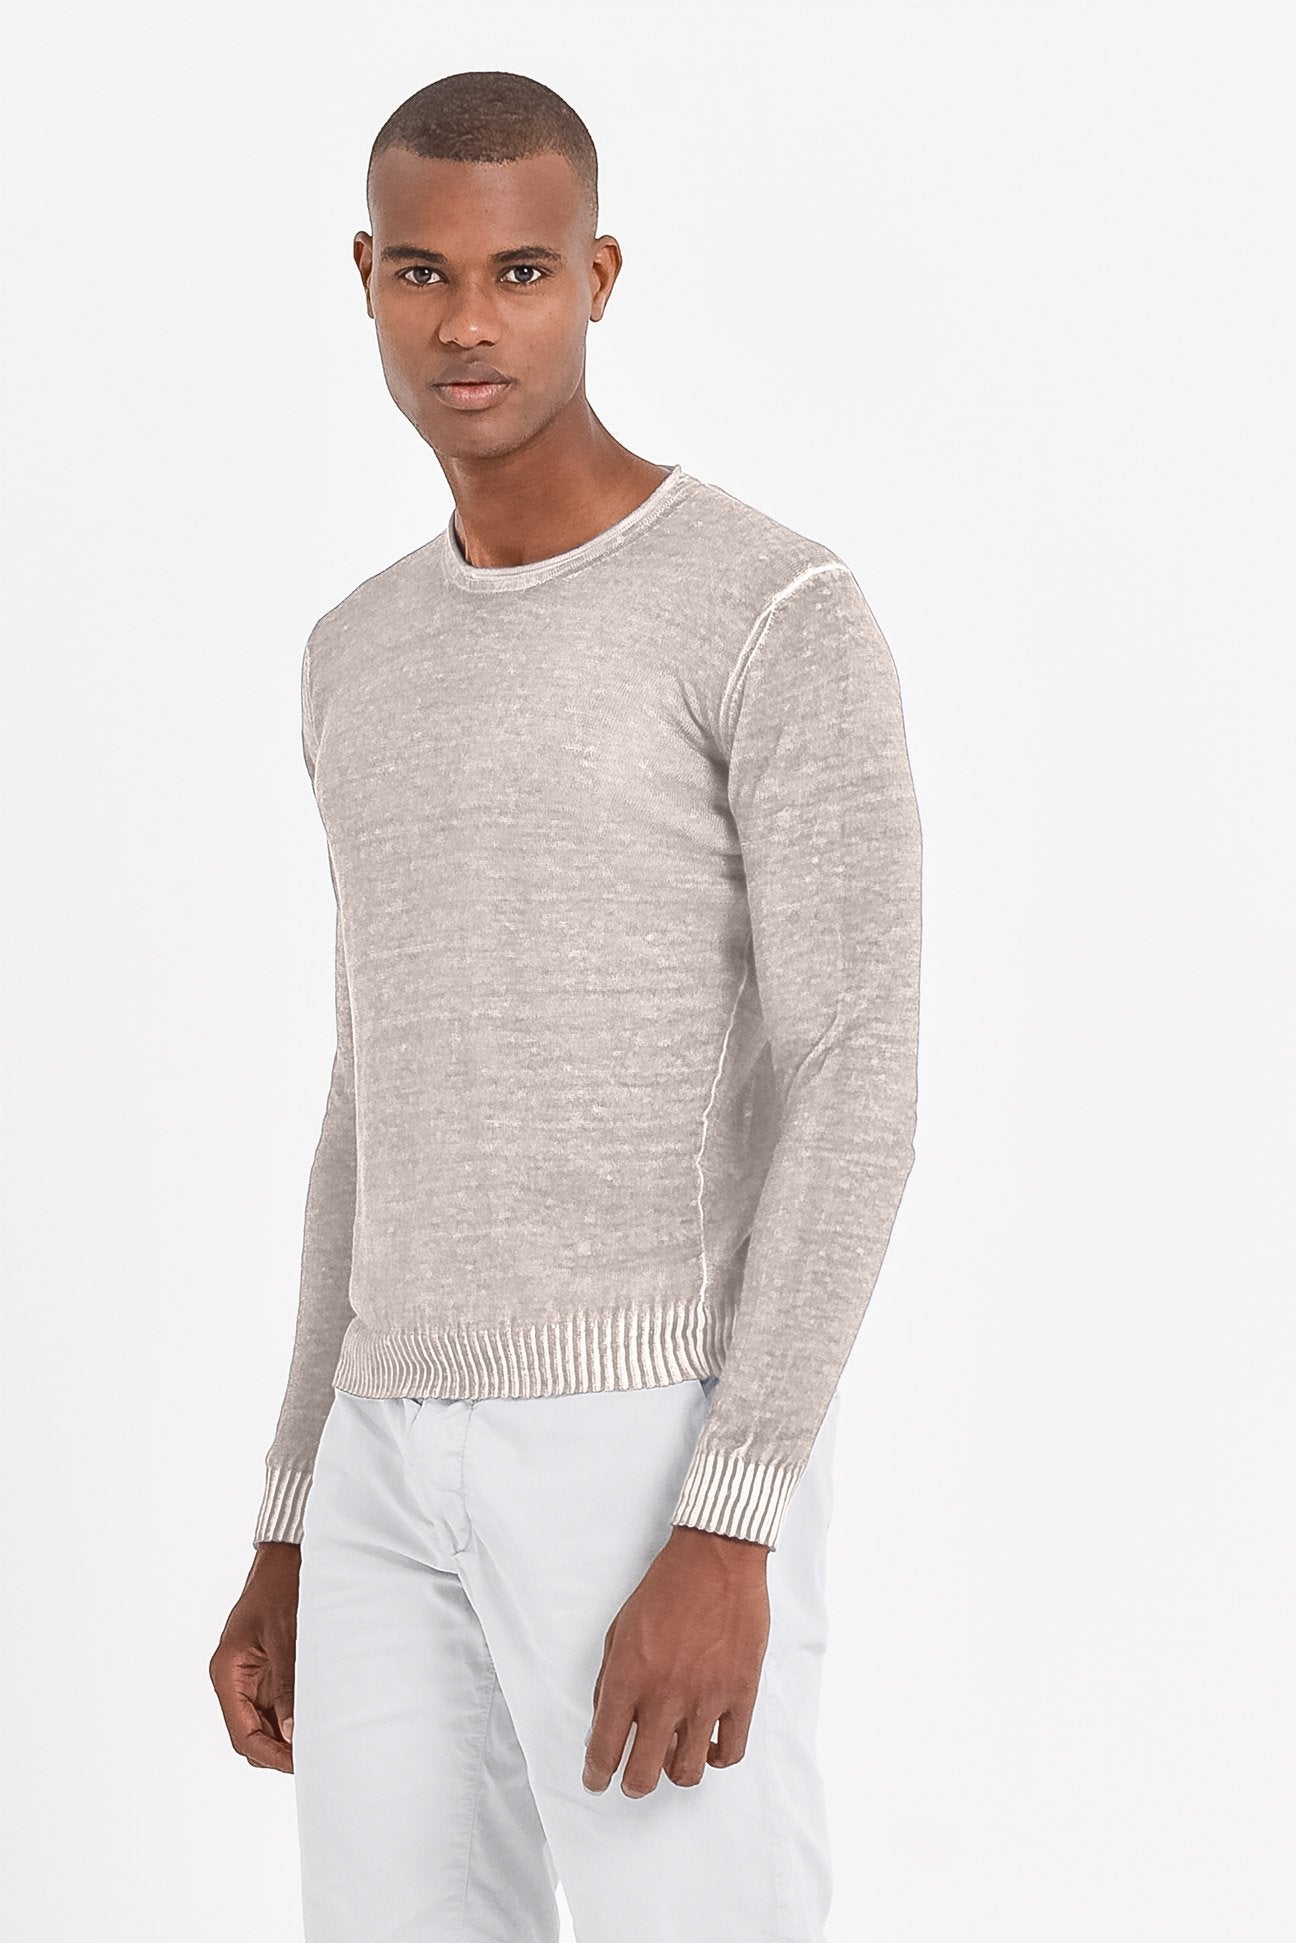 Rolled Hem Linen Crew - Canapa - Sweaters